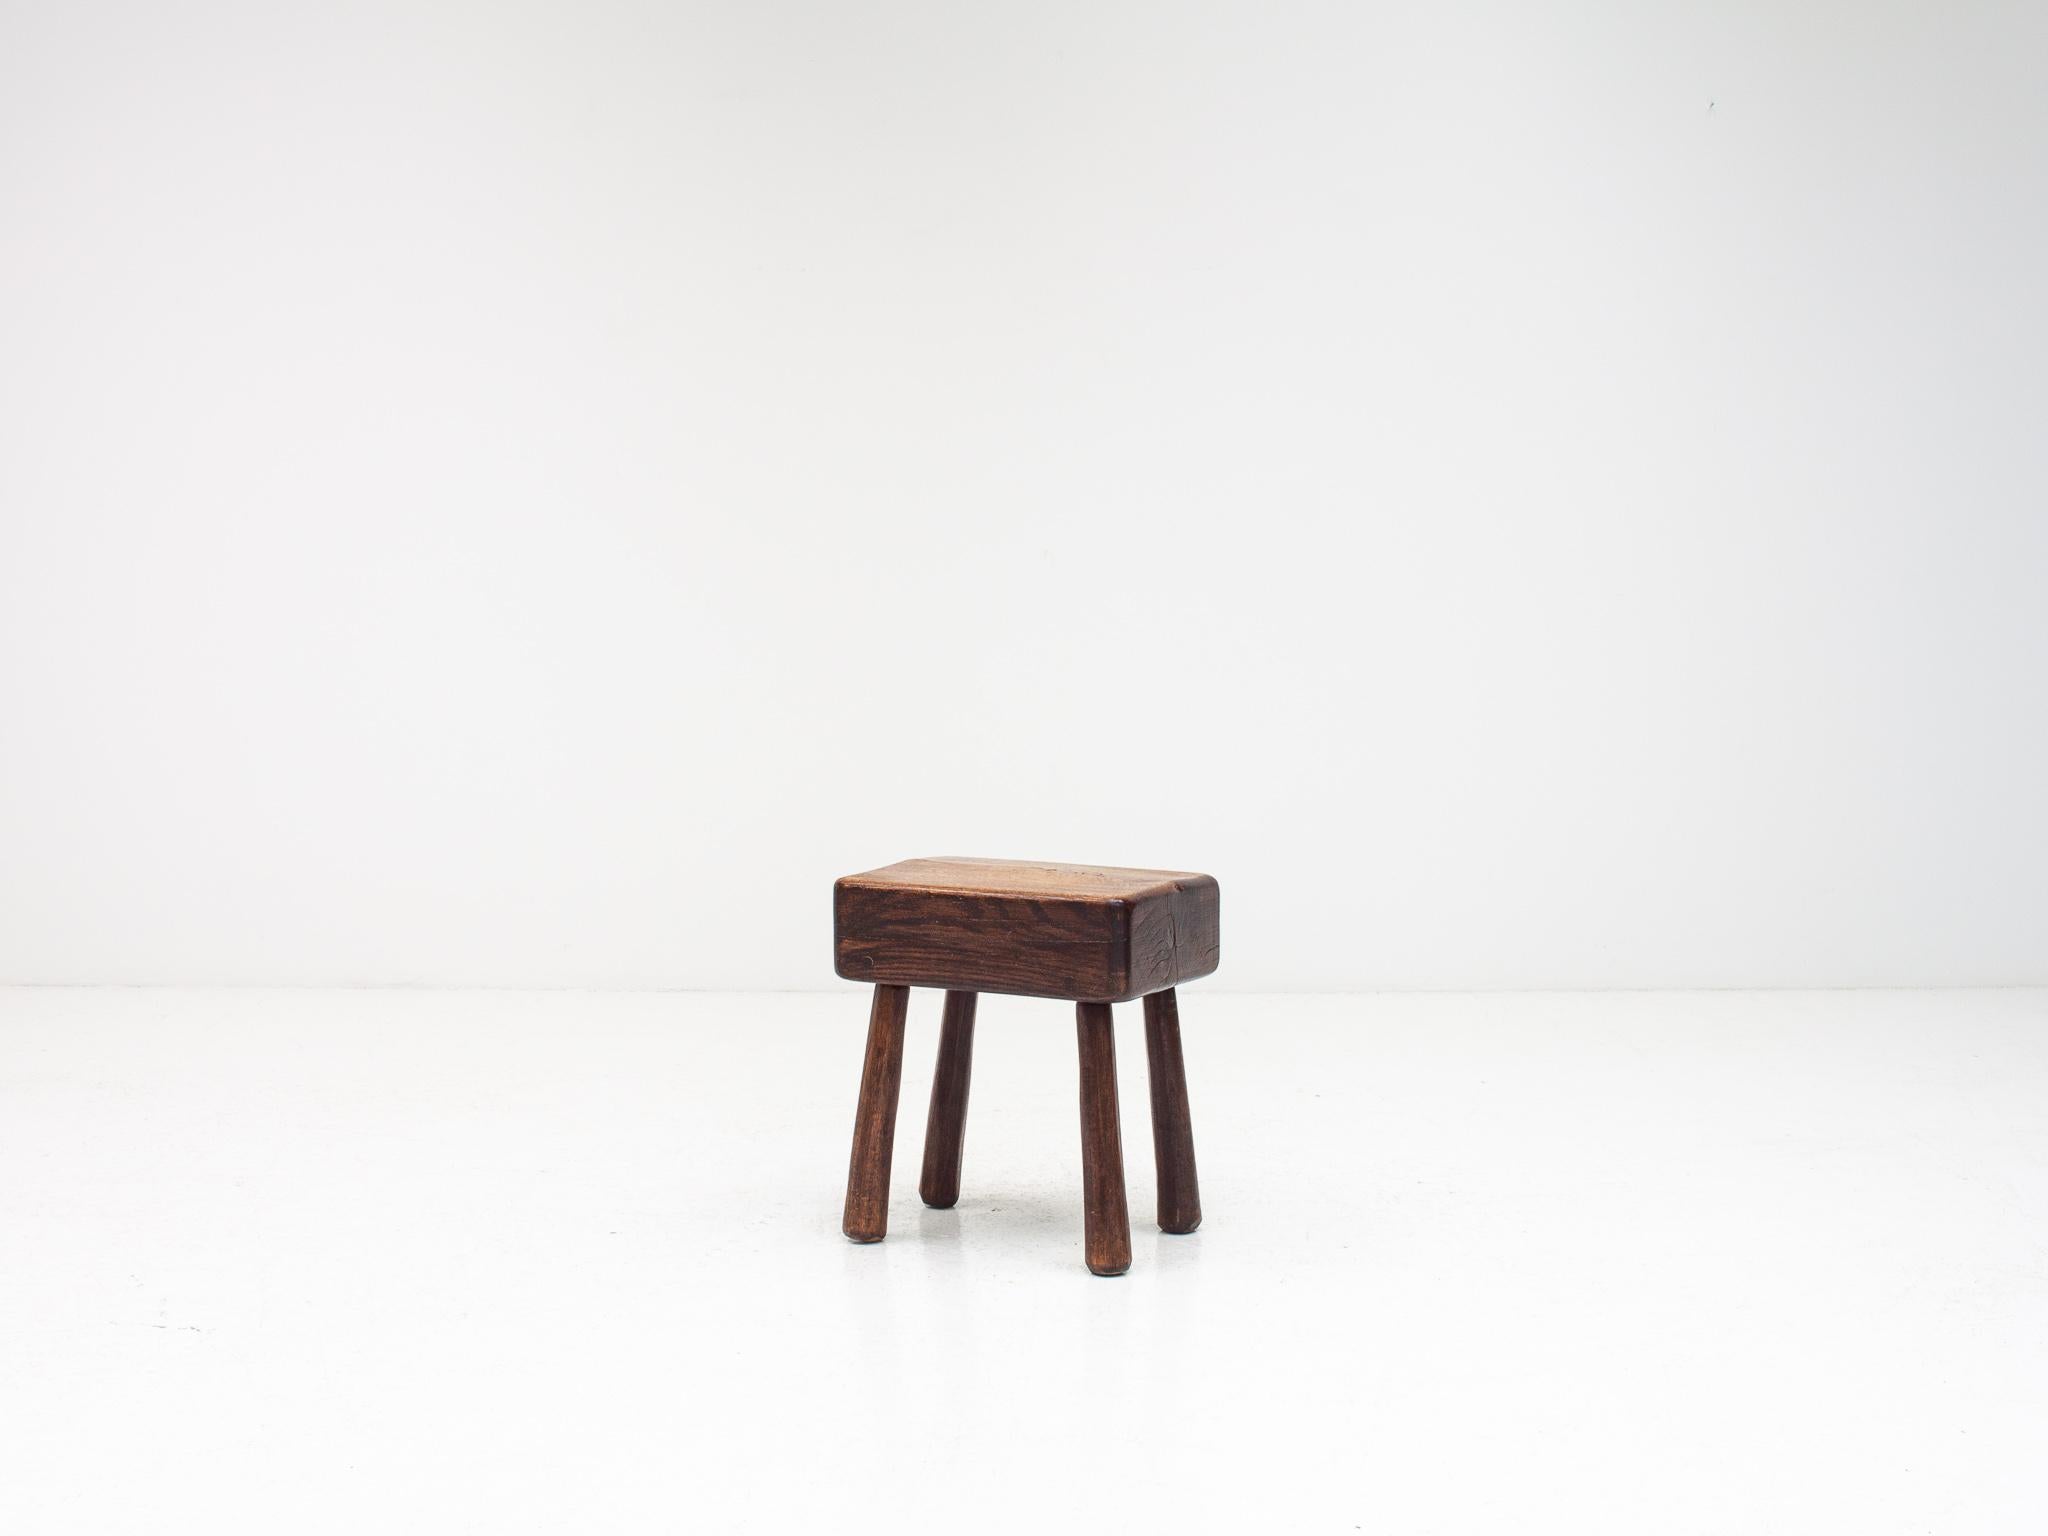 A rustic, vintage stool with a modernist feel.  Sitting on four tapered legs and formed of elm with a large slab top the piece has a great aesthetic.  Probably dating from the early 1900s.

Befitting of interiors that blend pieces of different